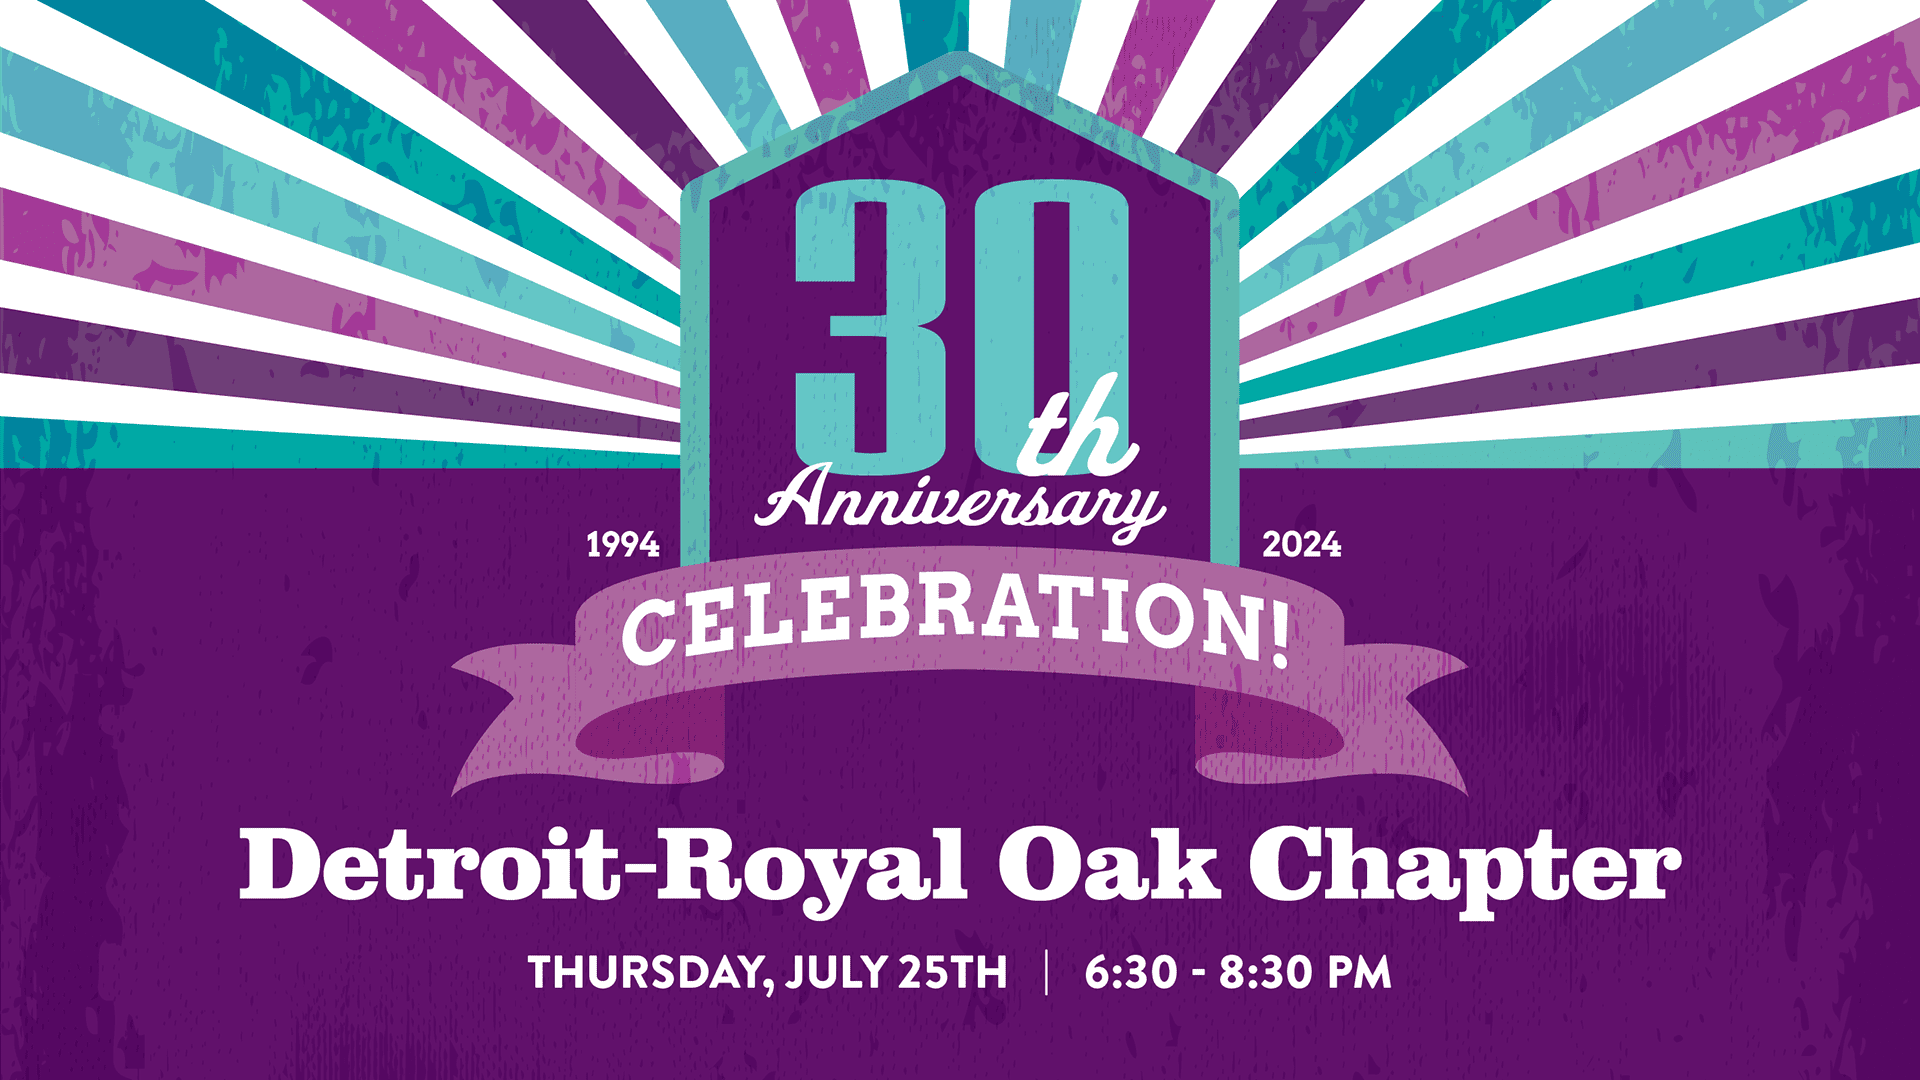 A colorful banner with radial stripes celebrates the Detroit-Royal Oak Chapter's 30th Anniversary. The event date and time are Thursday, July 25th, from 6:30 PM to 8:30 PM. The years 1994 and 2024 are marked above the banner.